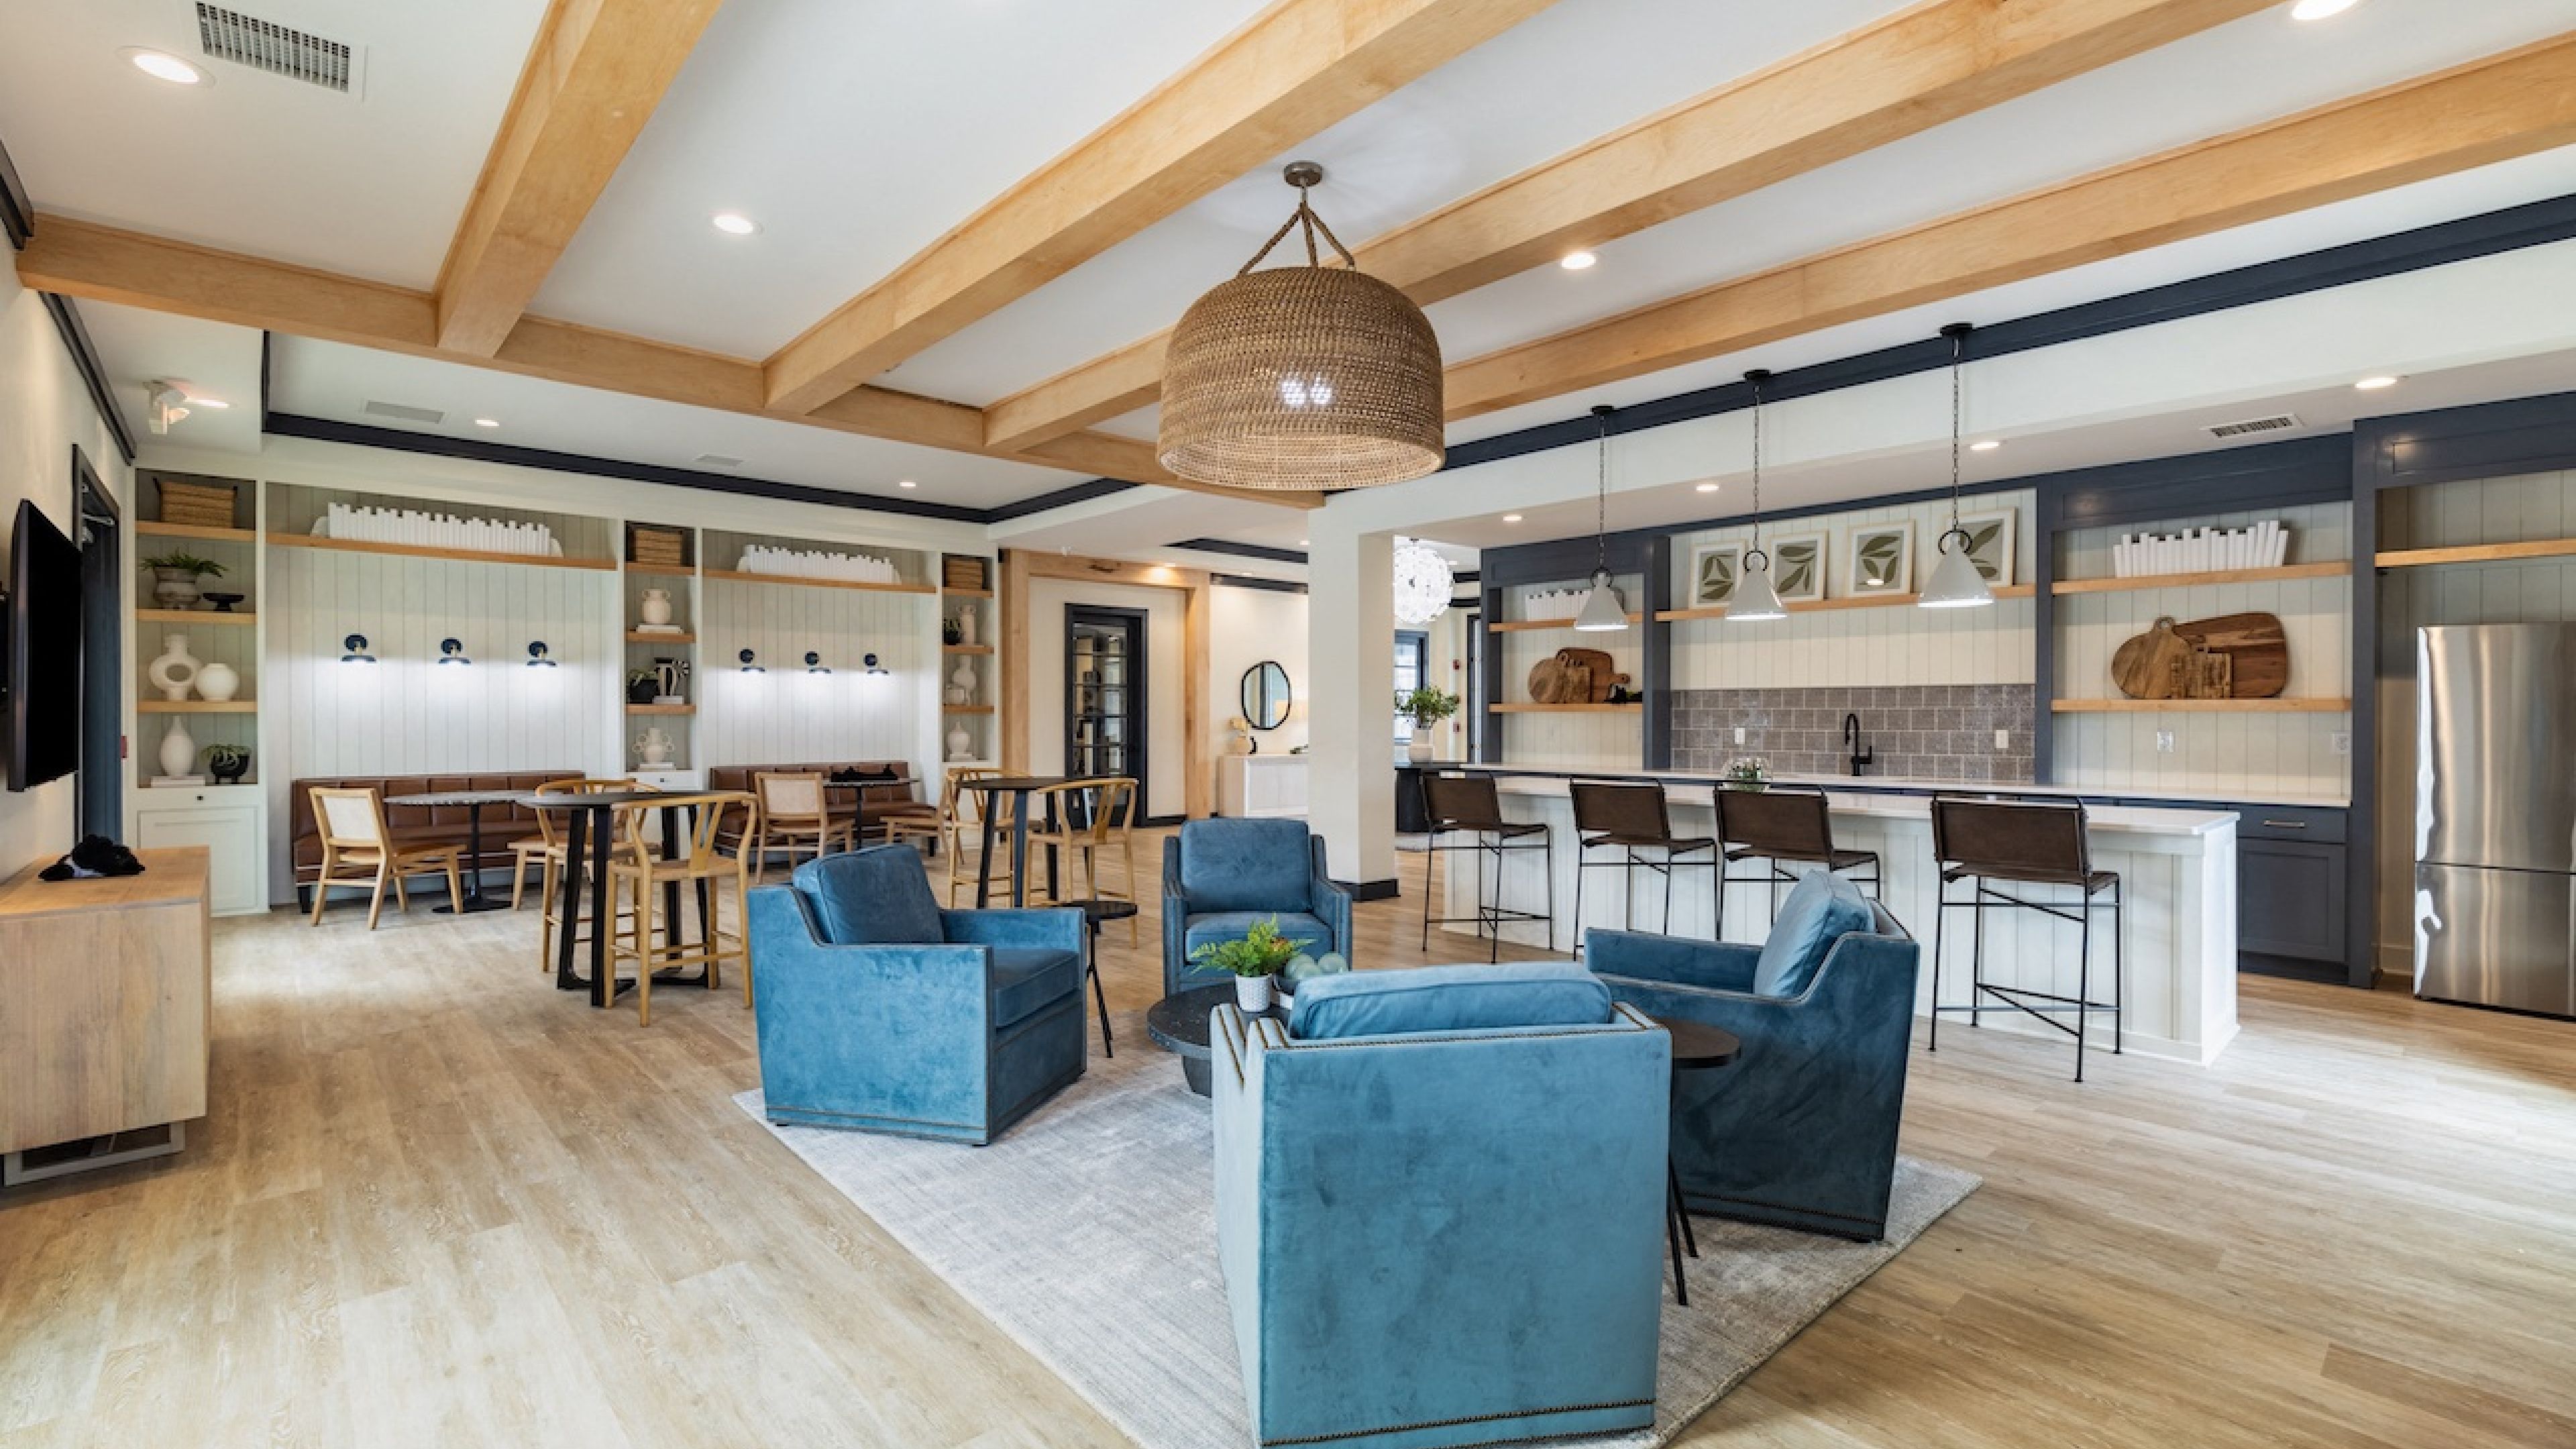 Hawthorne at Stillwater beautiful resident clubhouse amenity with seating and an entertainment space with kitchen